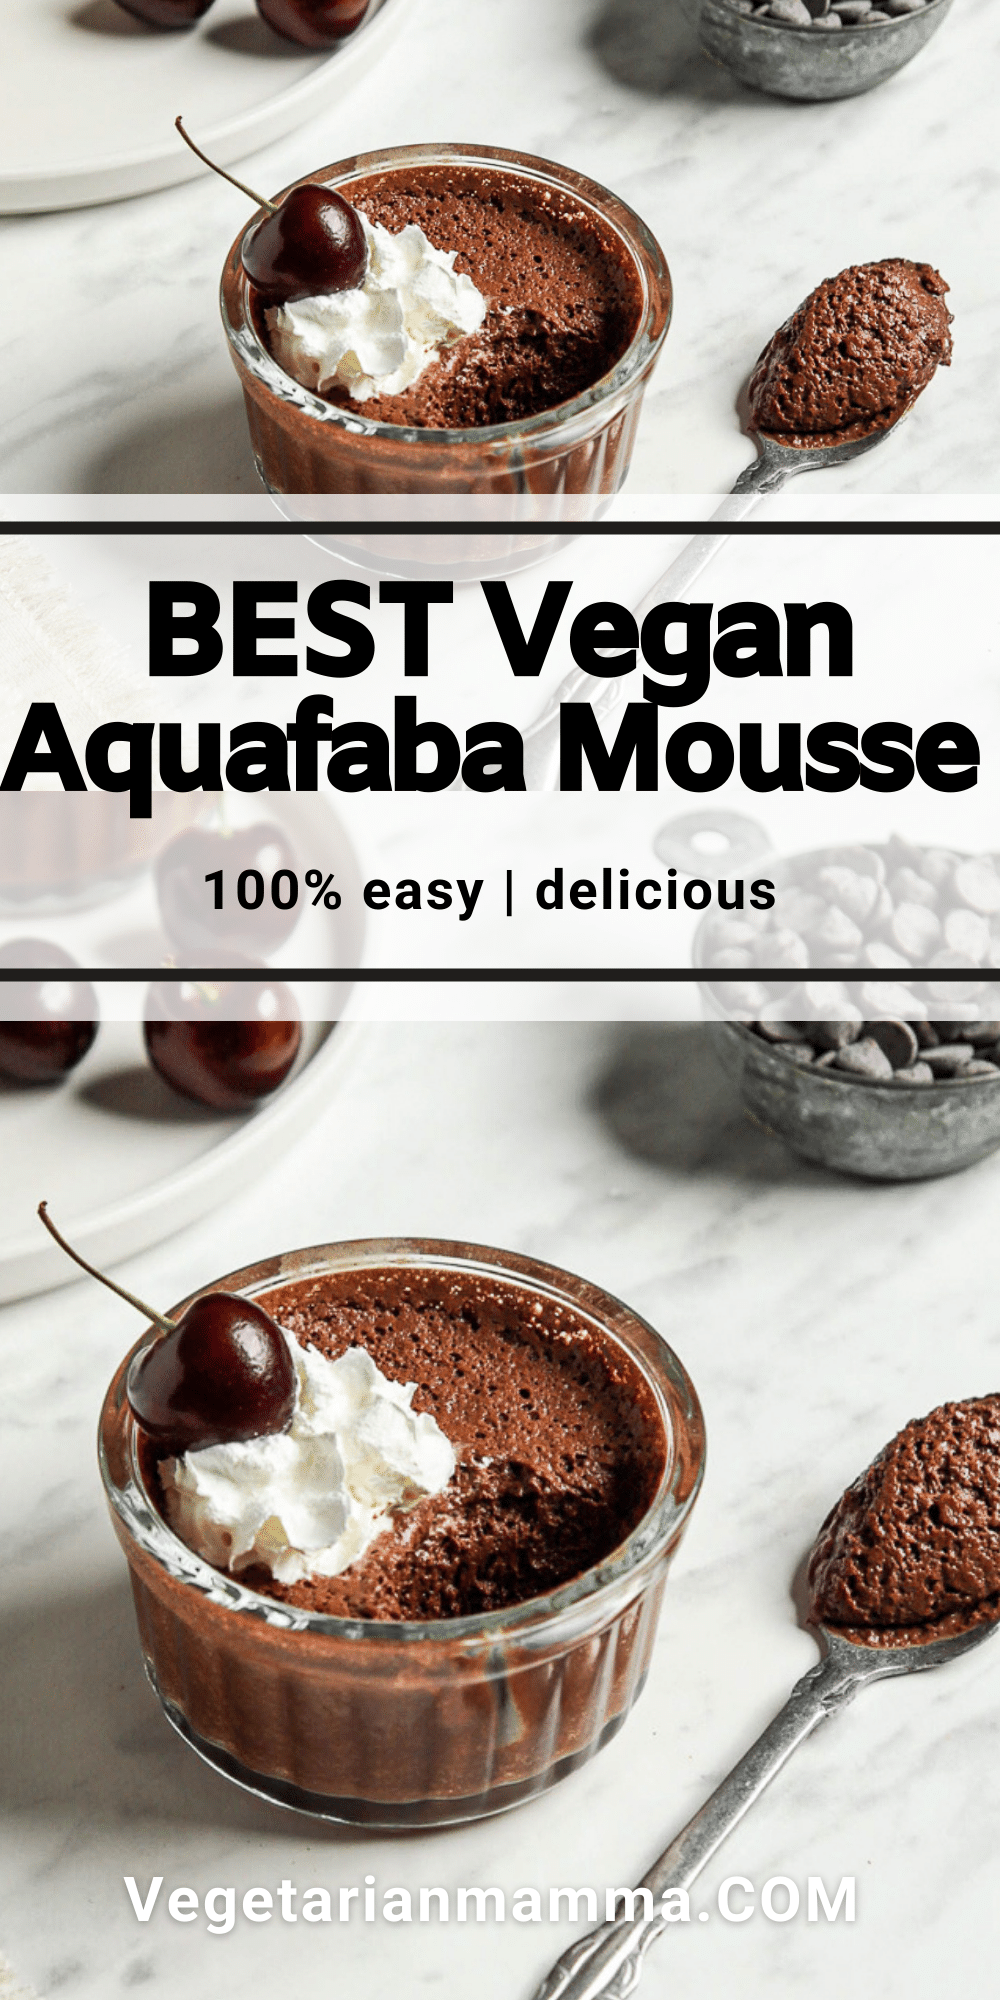 images of aquafaba mousse with text overlay